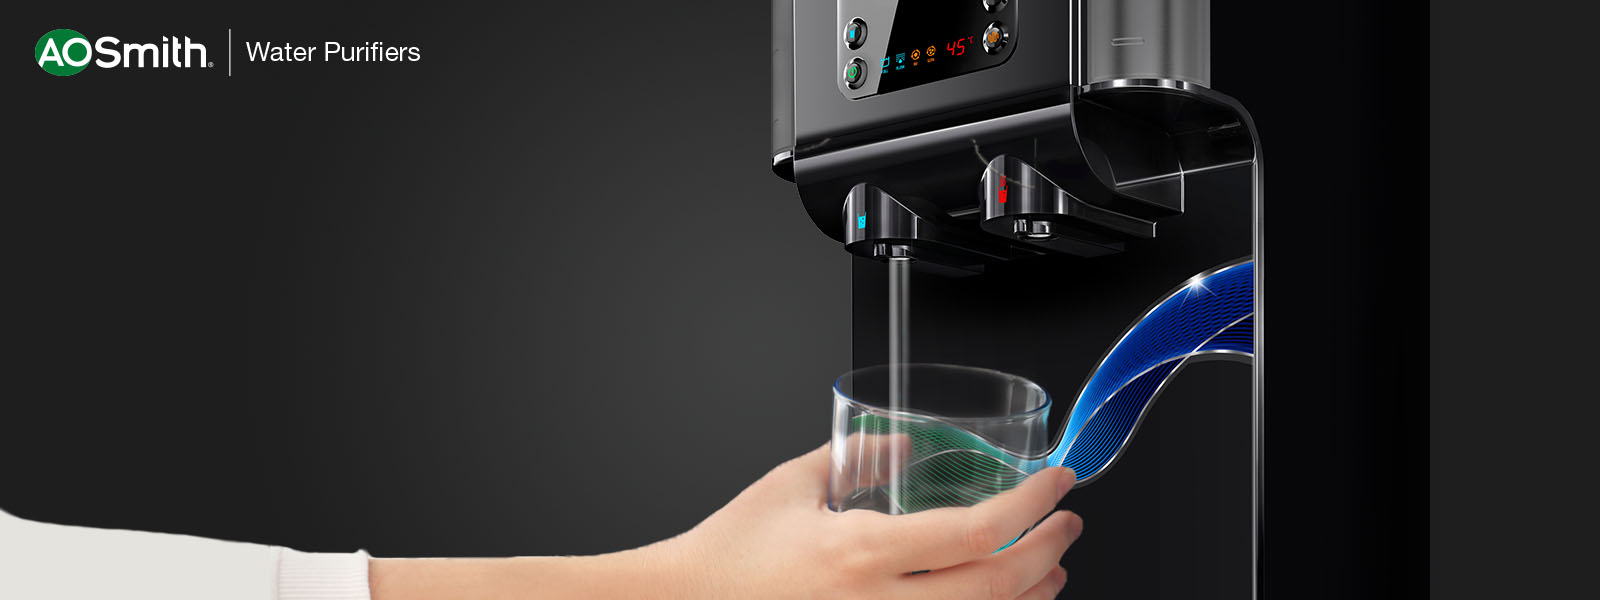 Choosing the best Water Purifier for your home